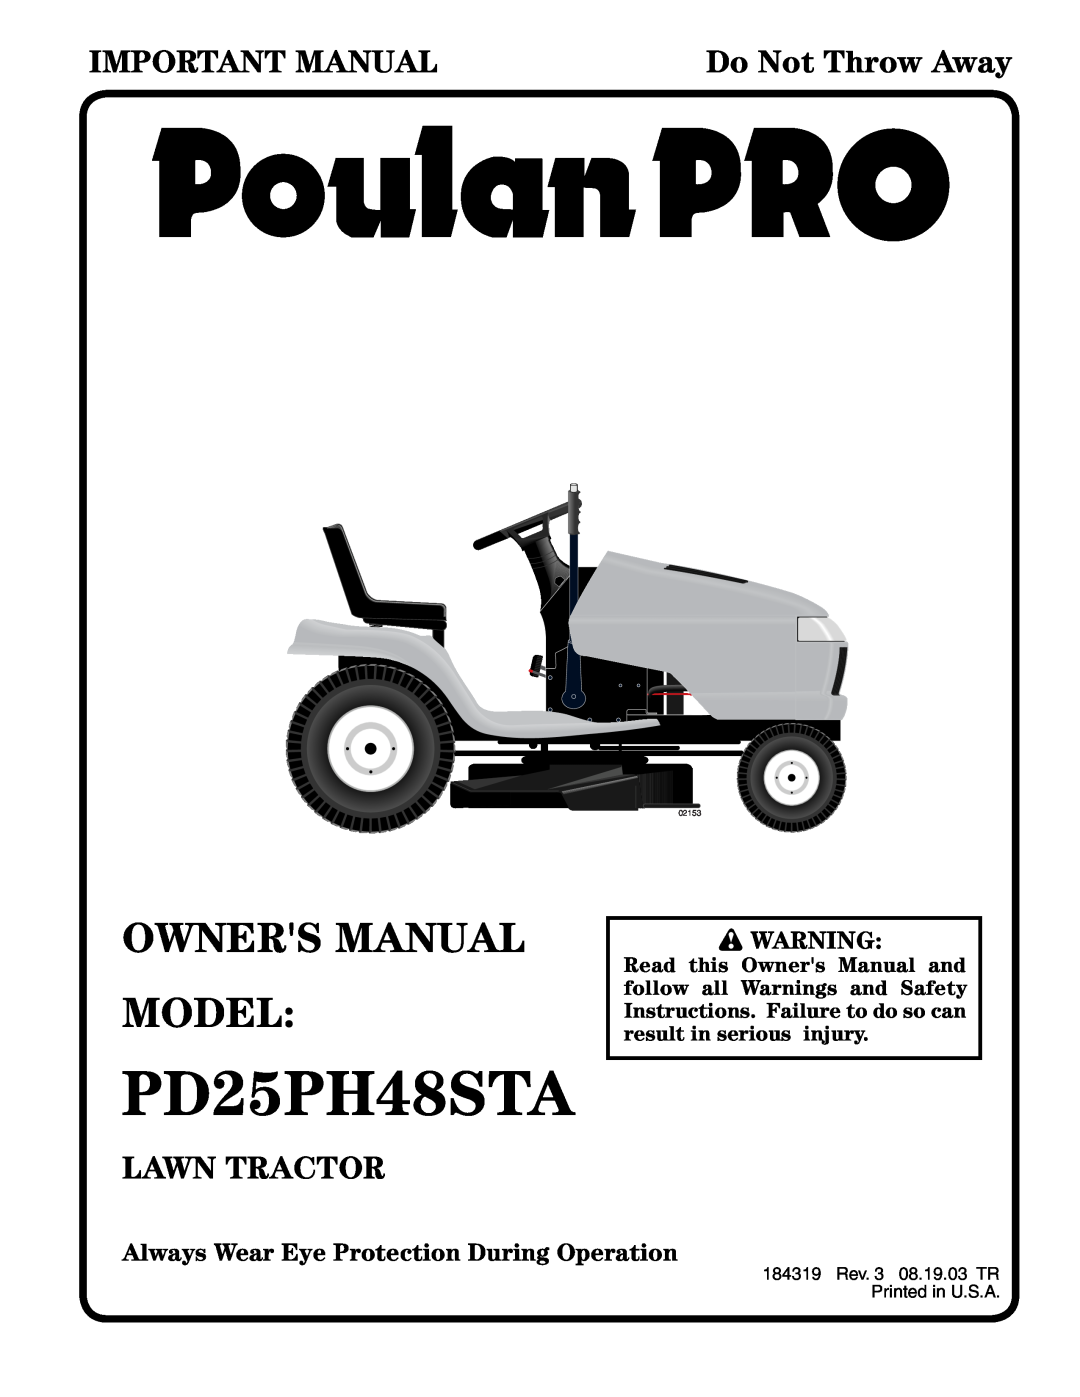 Poulan PD25PH48STA owner manual Always Wear Eye Protection During Operation, Important Manual, Lawn Tractor, 02153 